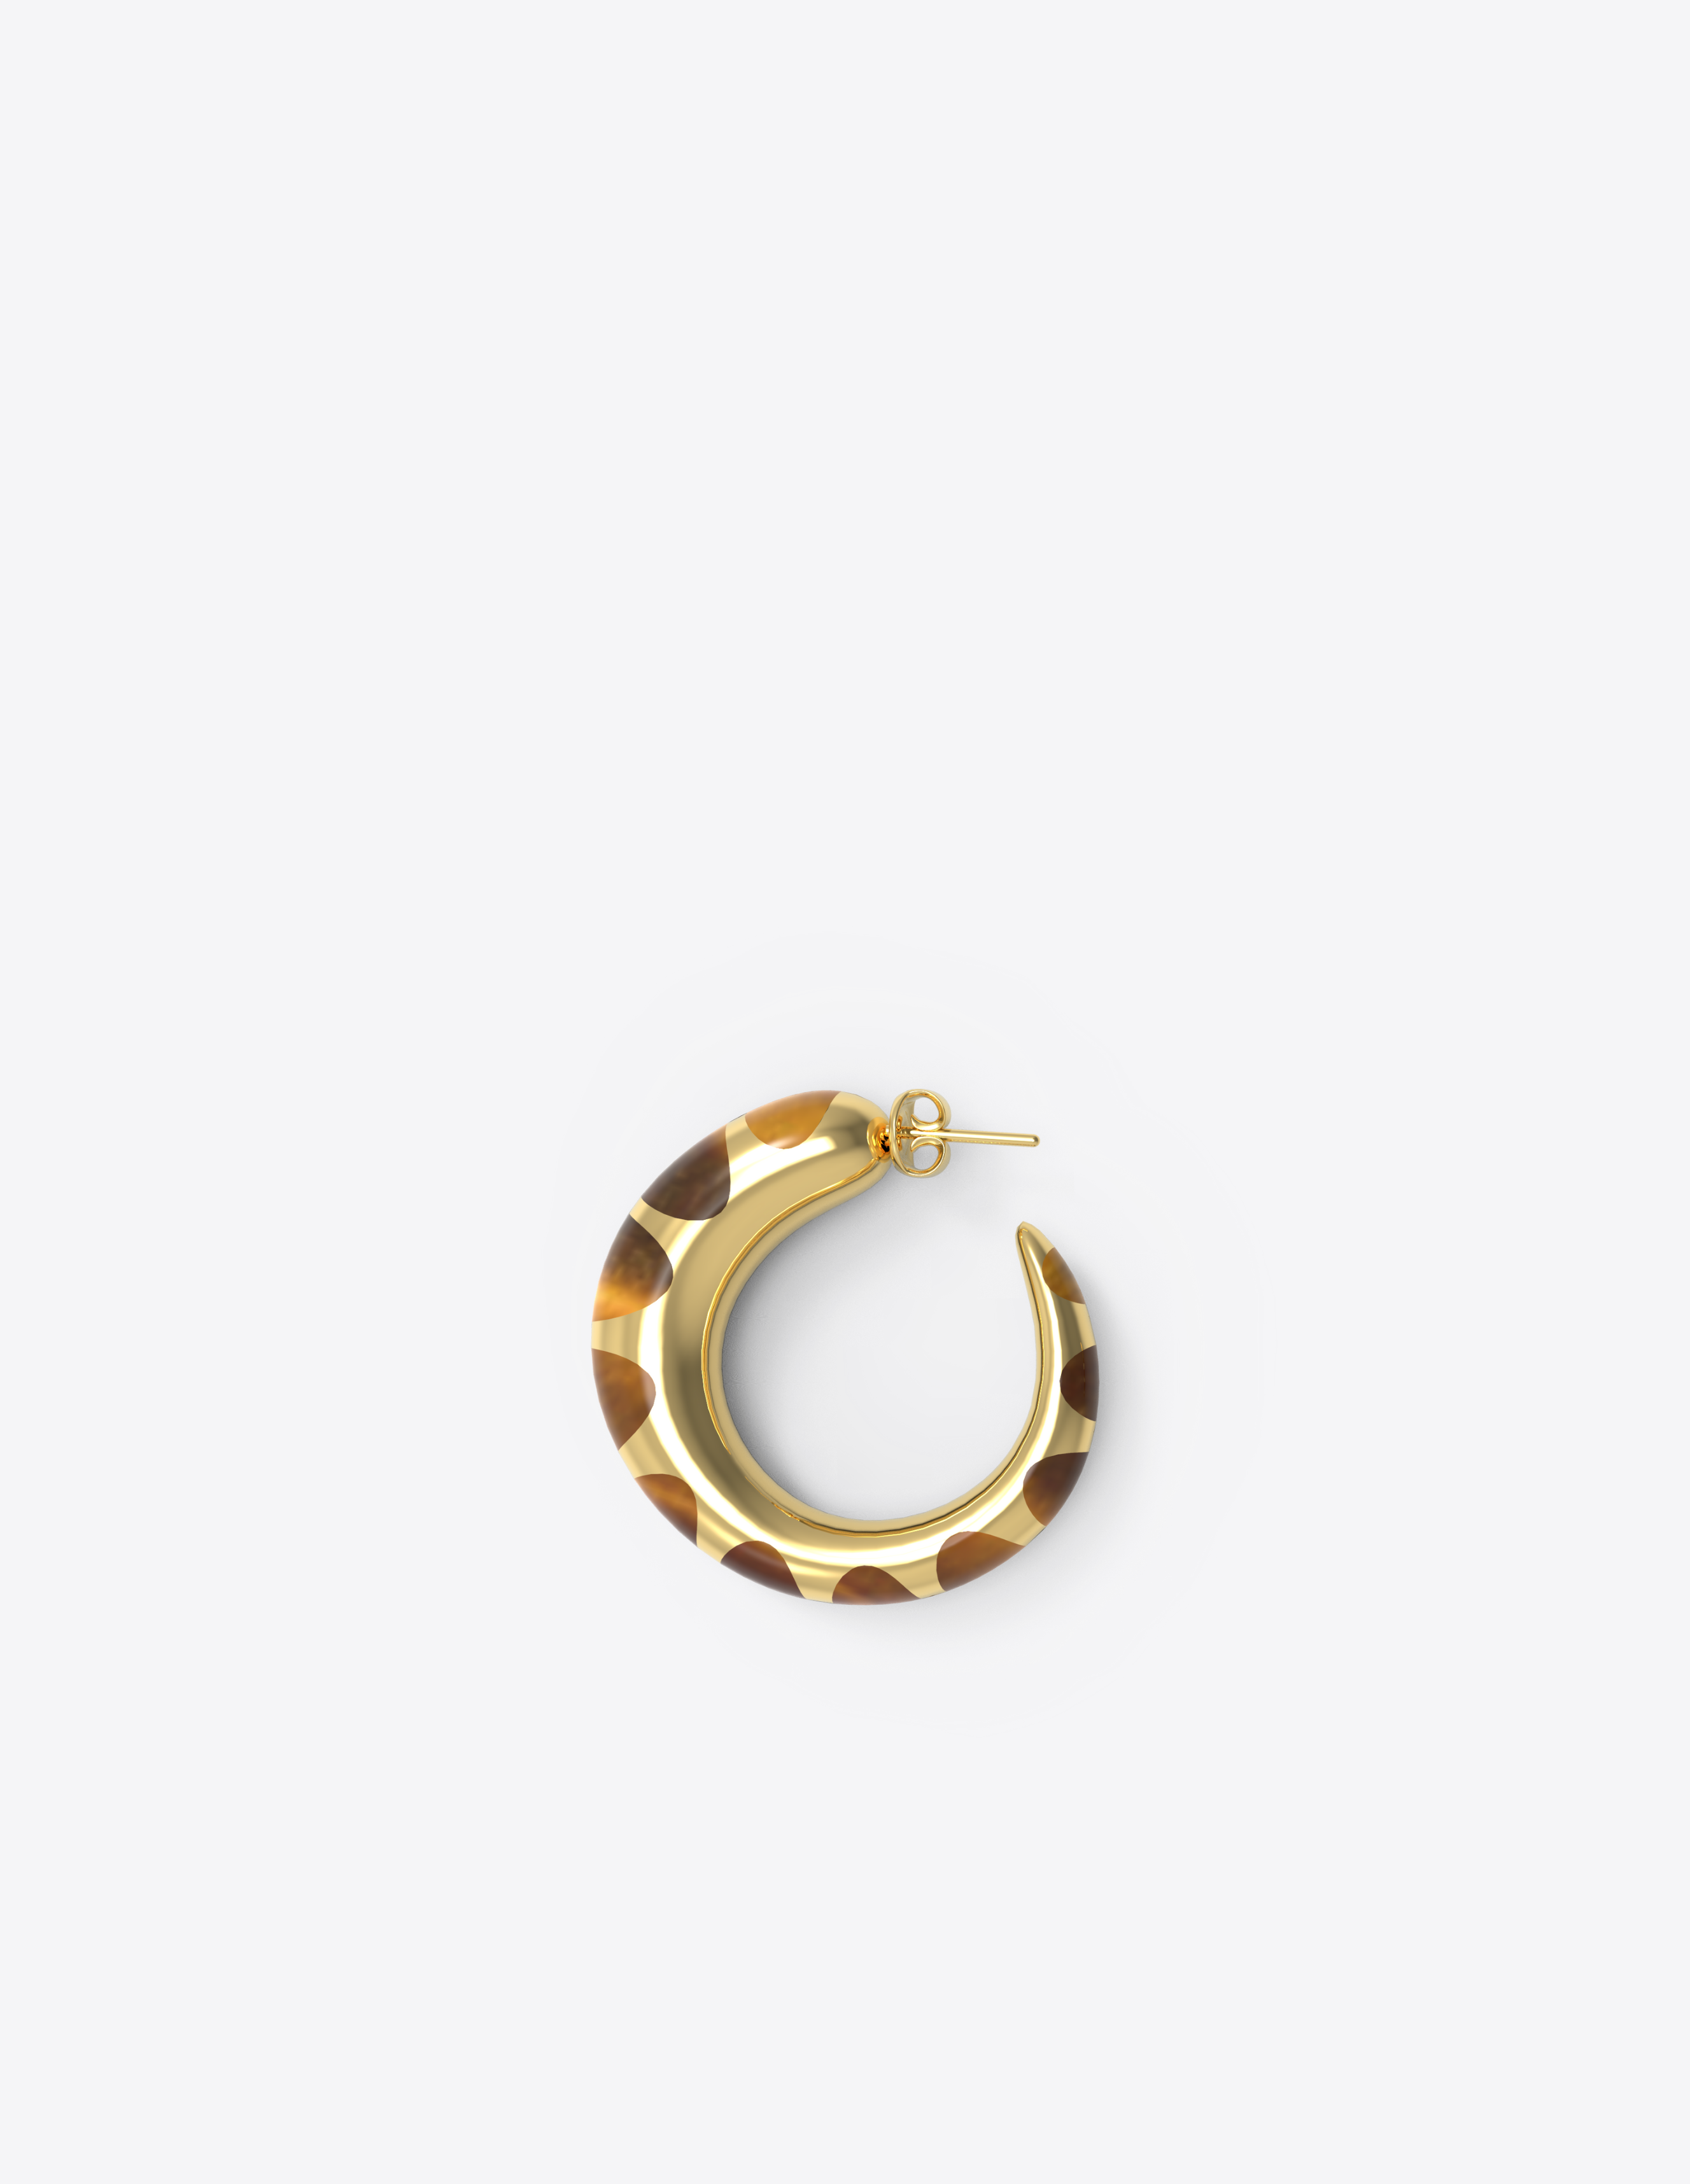 Tiny Khartoum Hoops with Striped Brown Tiger Eye Inlay in Gold Vermeil